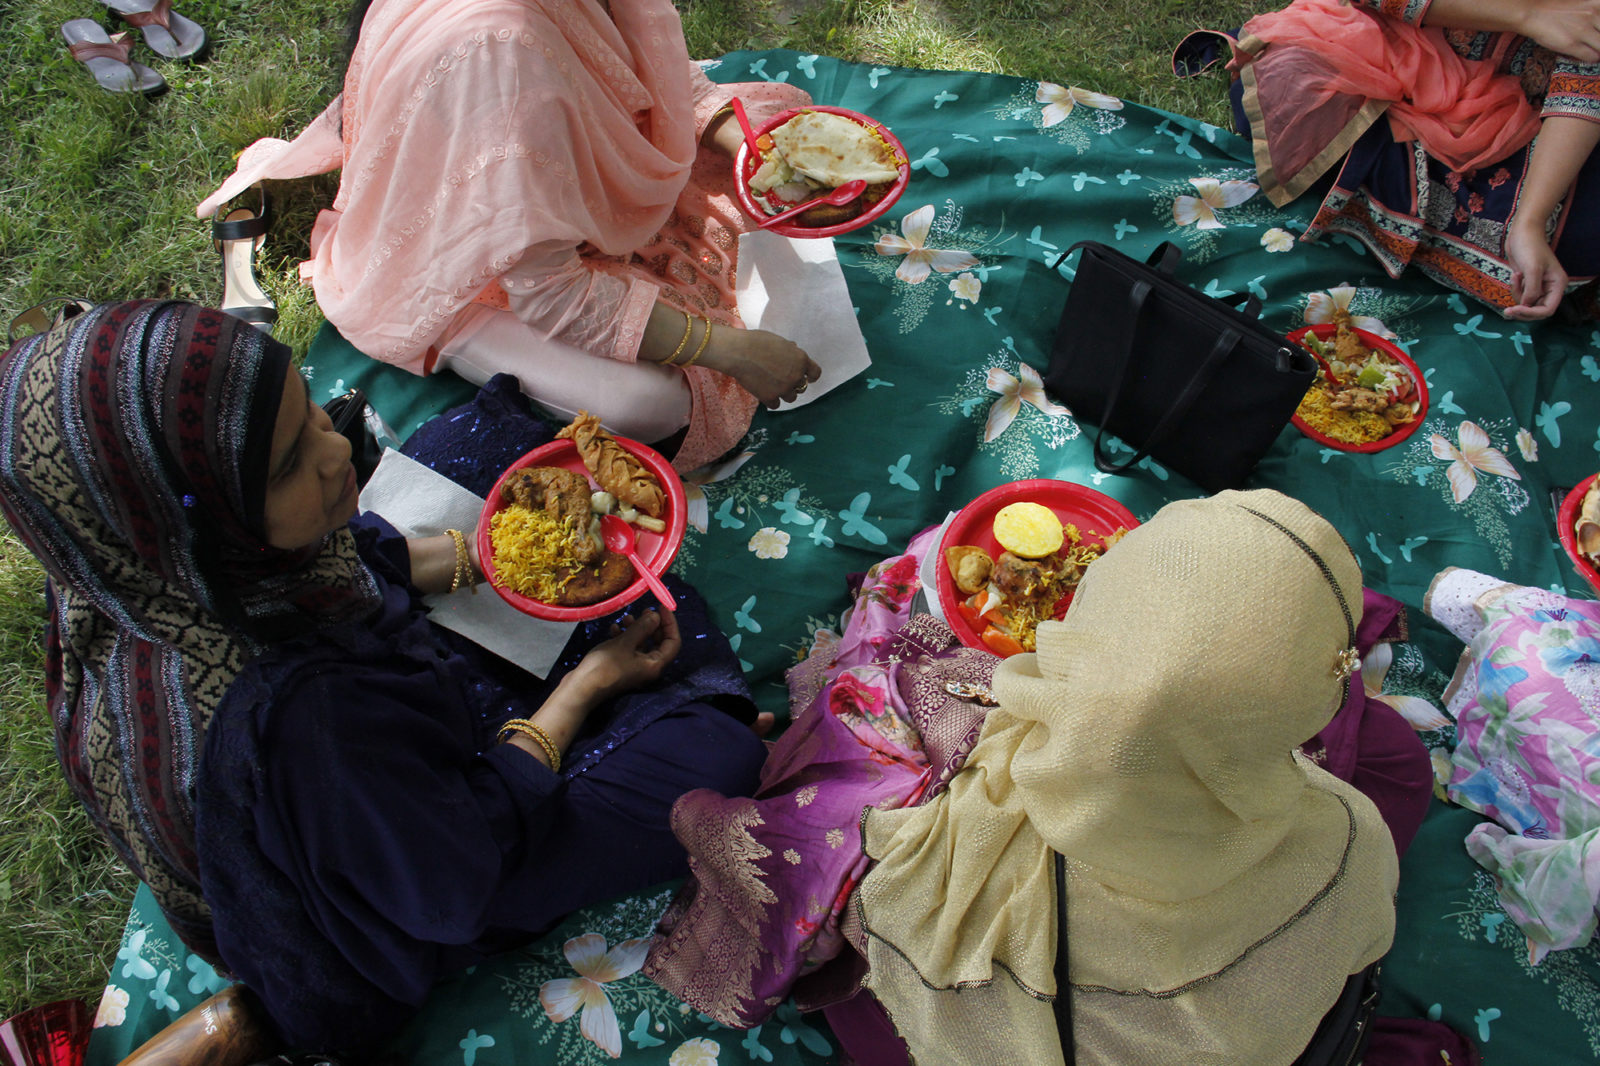 A photo of women on a blanket eating at an outdoor gathering